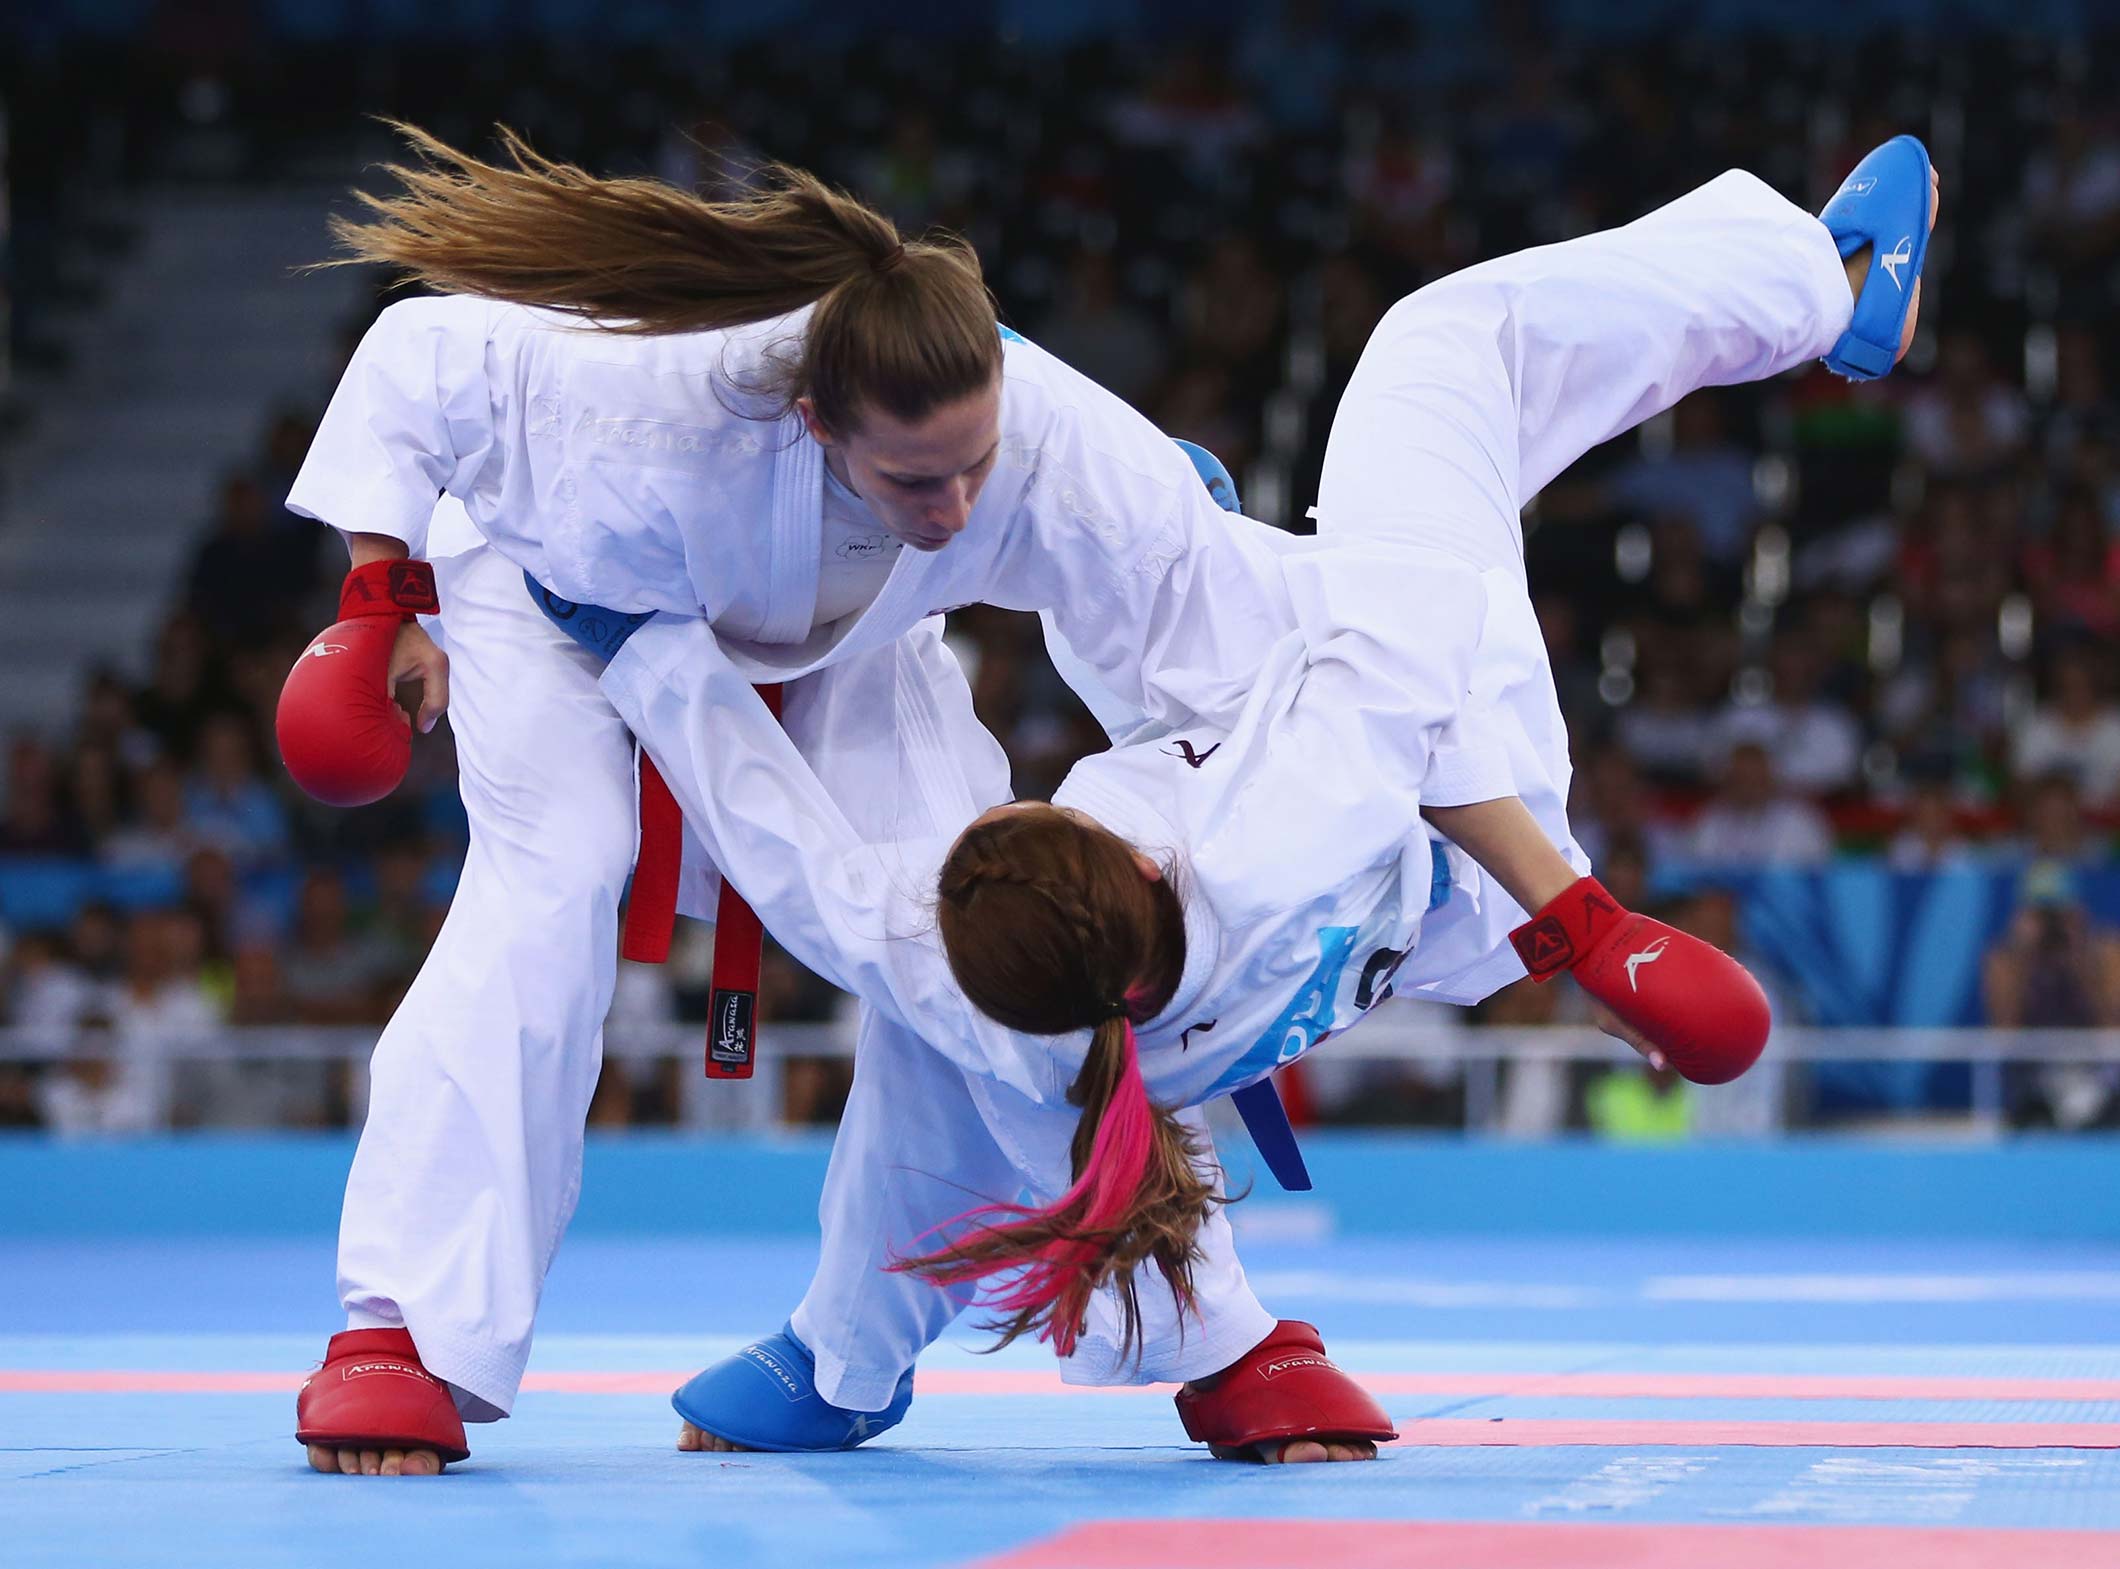 Karate is making its debut on an Olympic stage at Buenos Aires 2018 